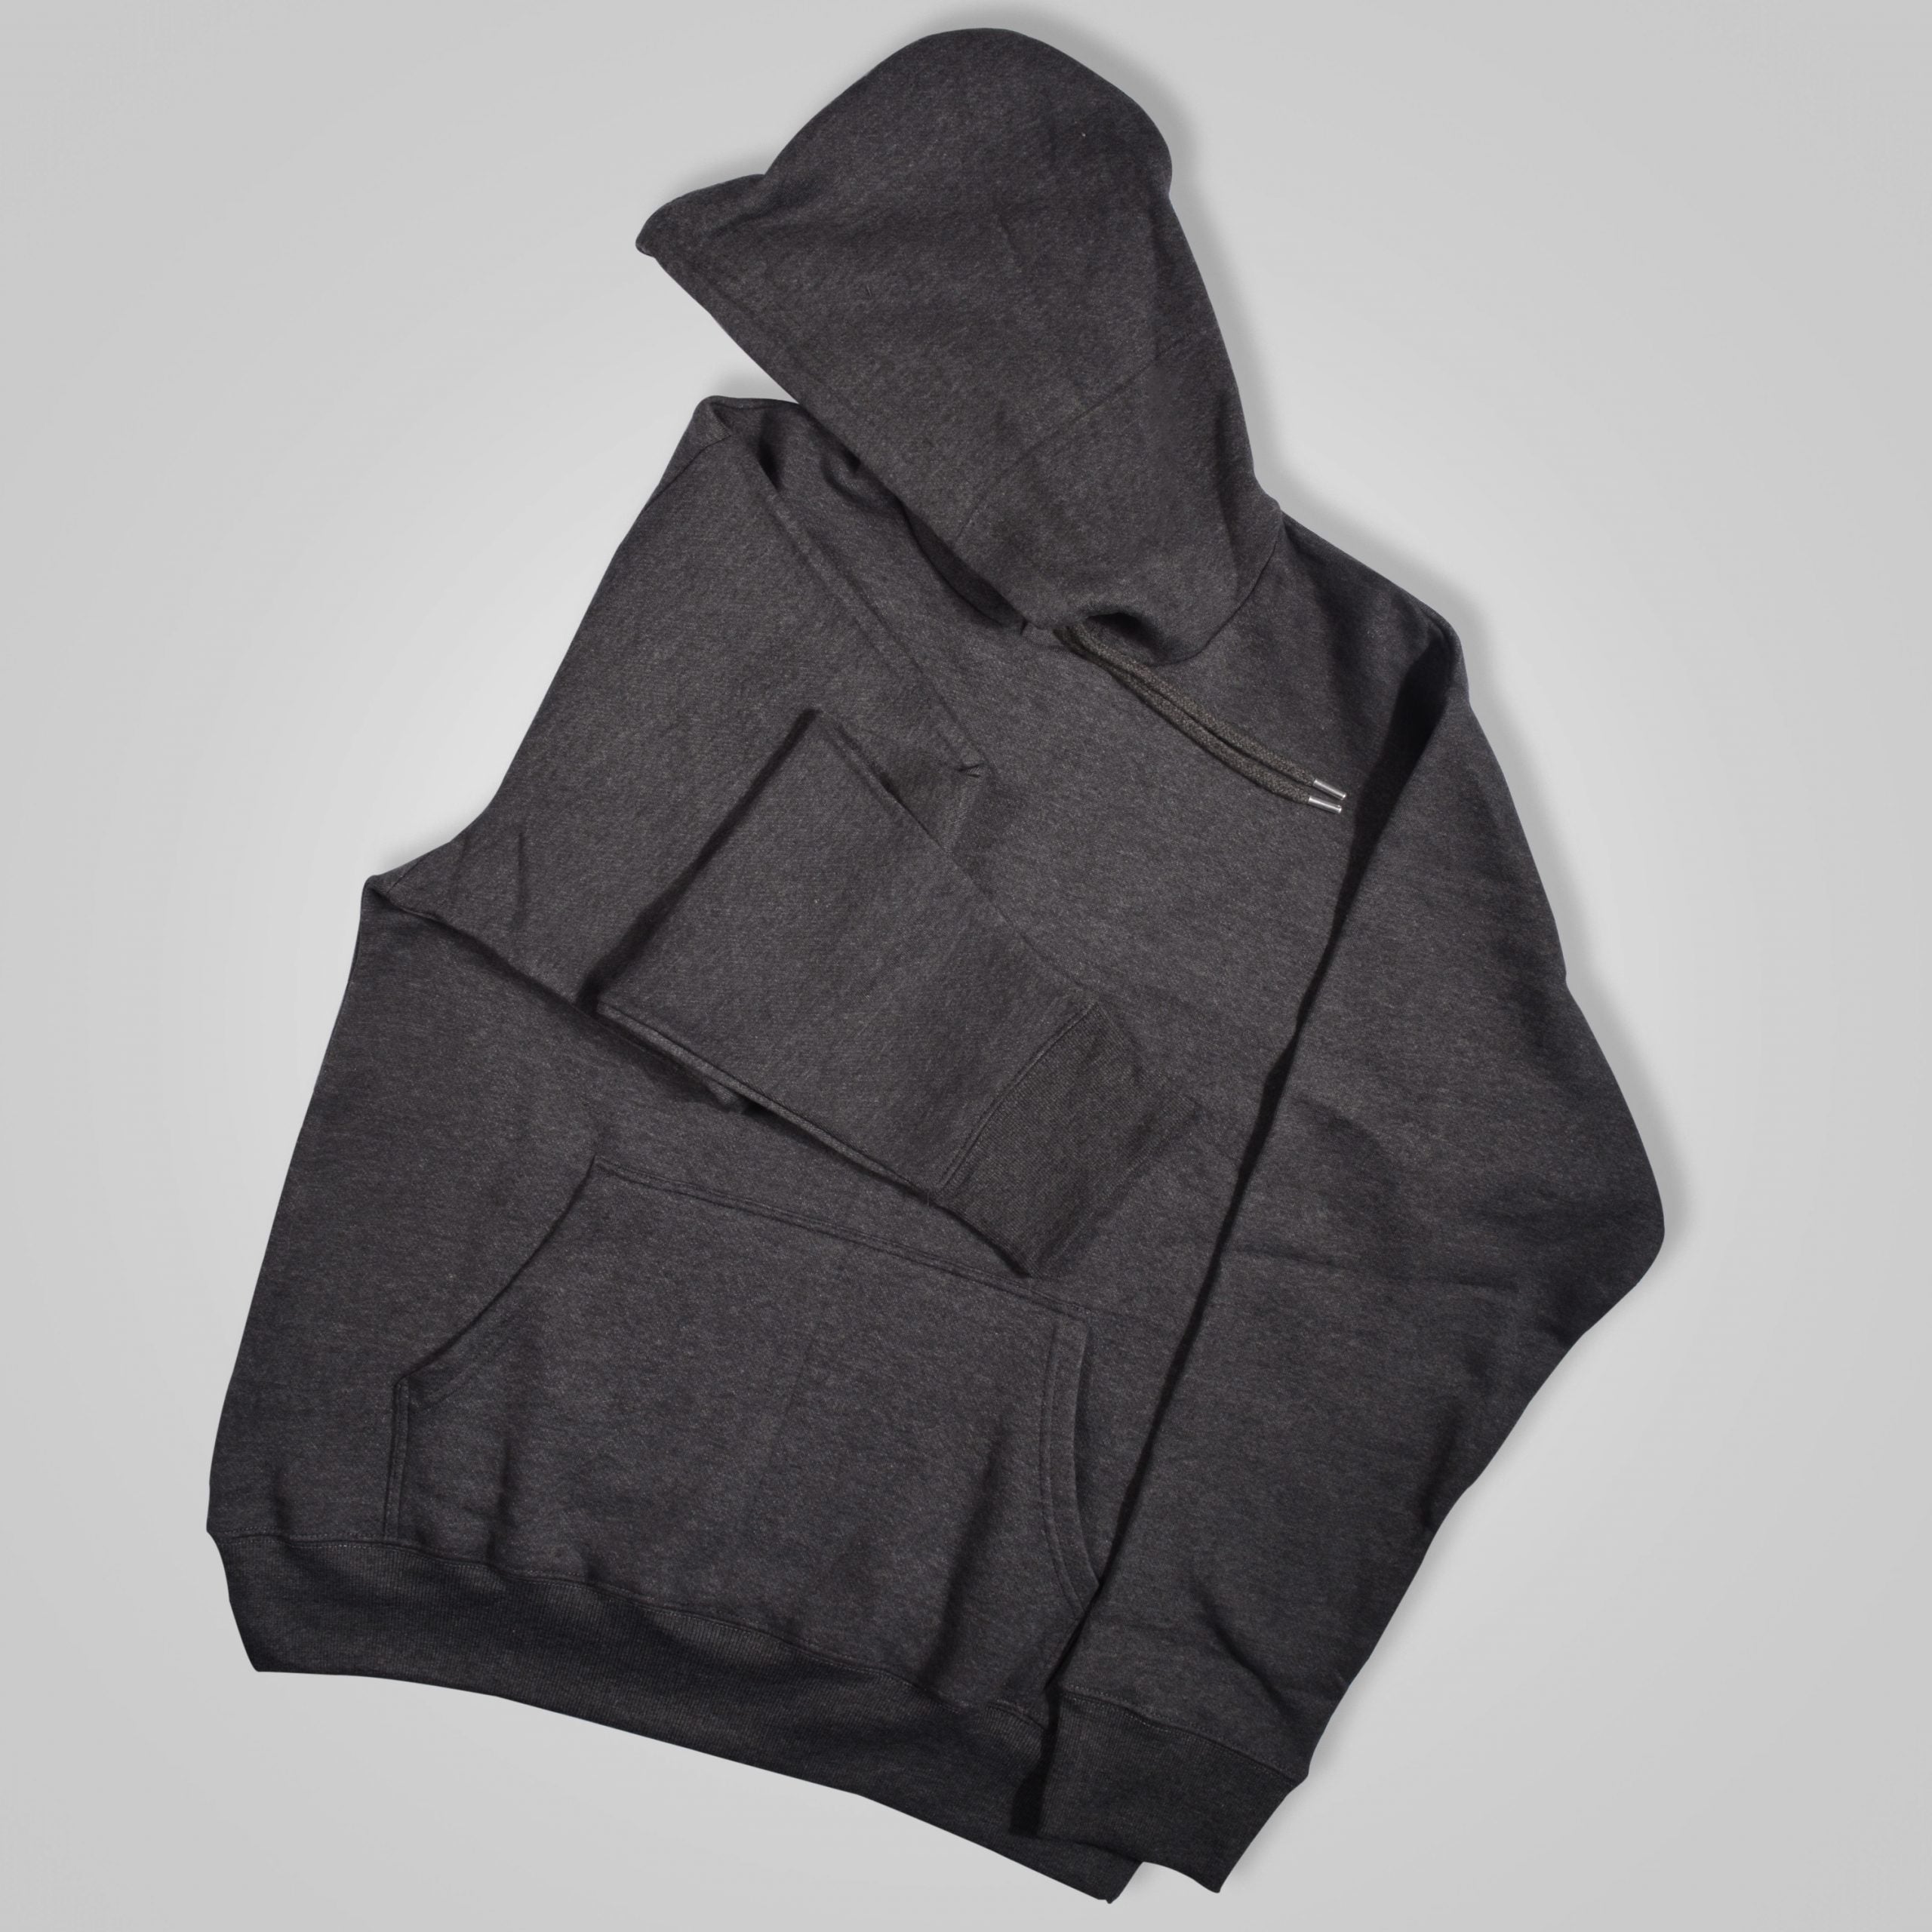 PULLOVER CHARCOAL HOODIE - Code 21